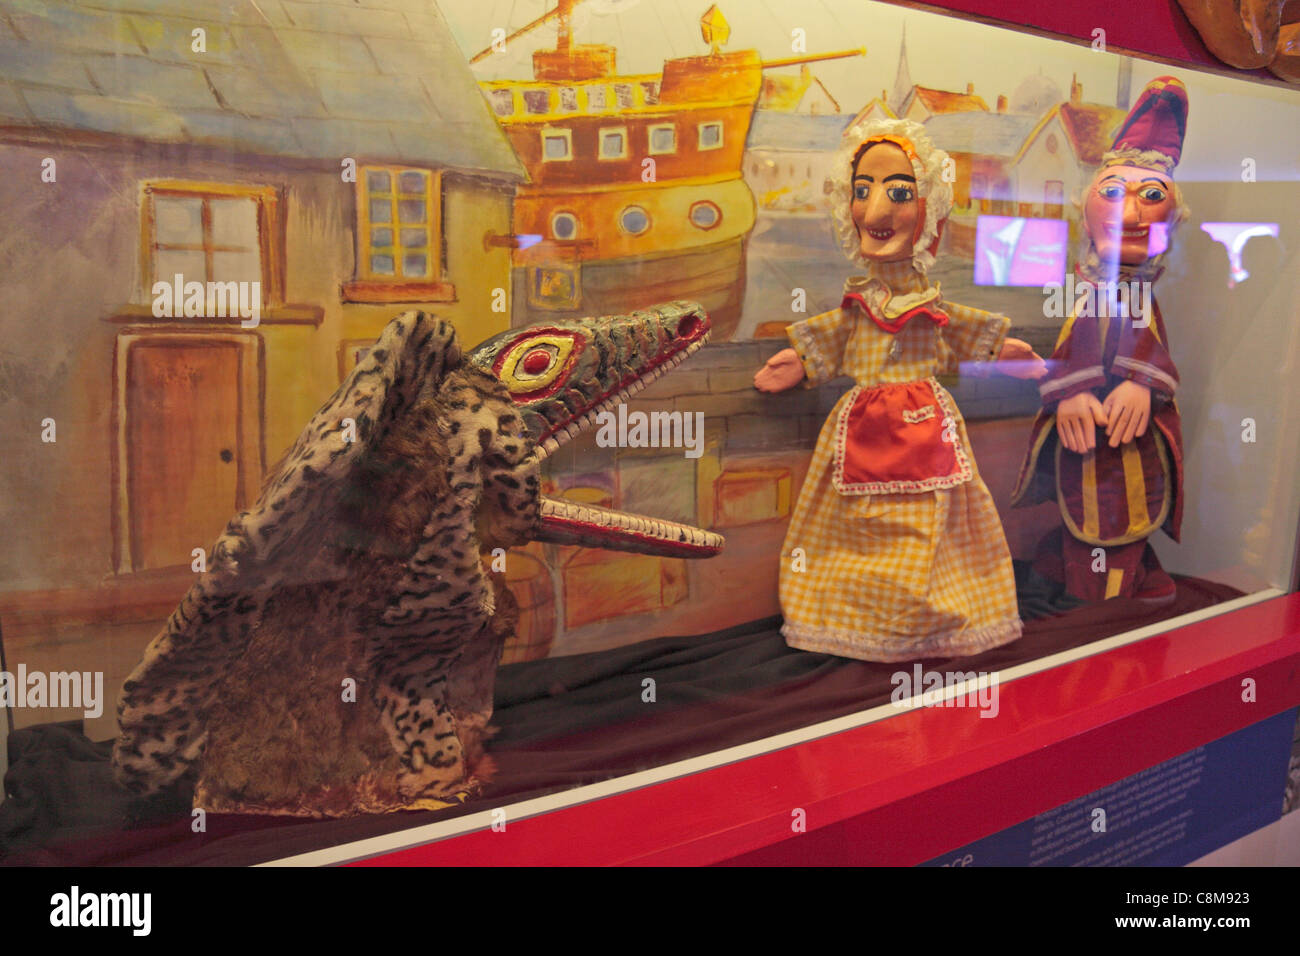 Display of Punch and Judy (and crocodile) puppets in the Museum of Liverpool on Pier Head, Liverpool, UK. Stock Photo